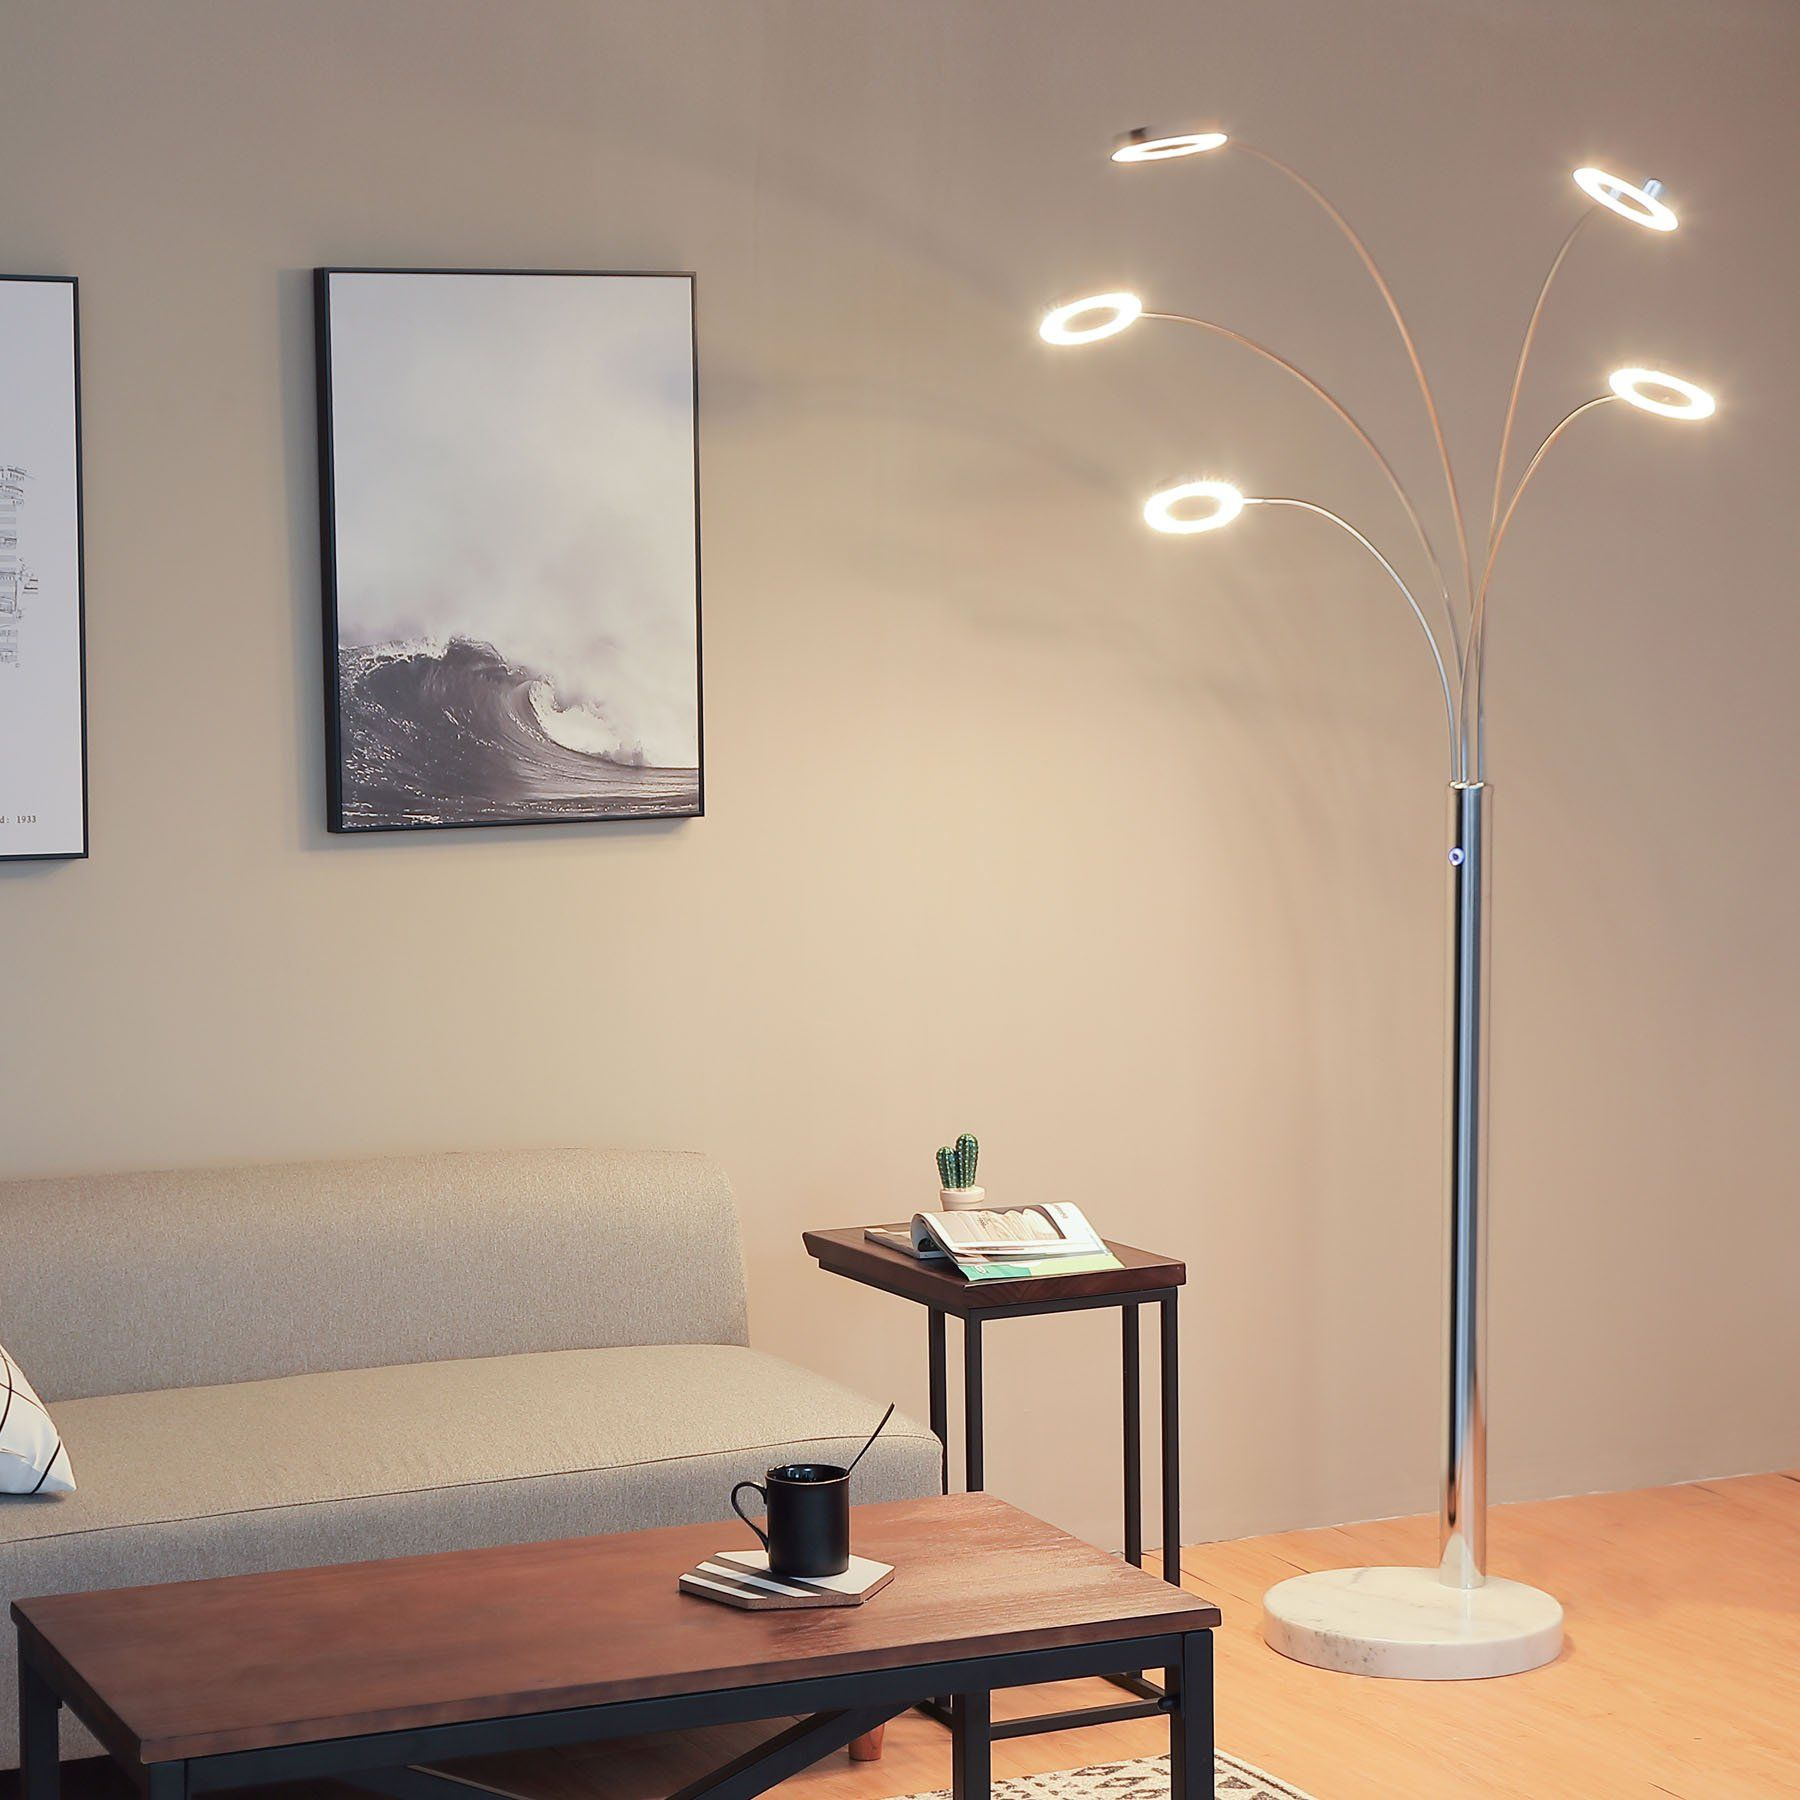 Coz Bright Led Floor Lamp With 5 Dimmable Lights Modern inside sizing 1800 X 1800